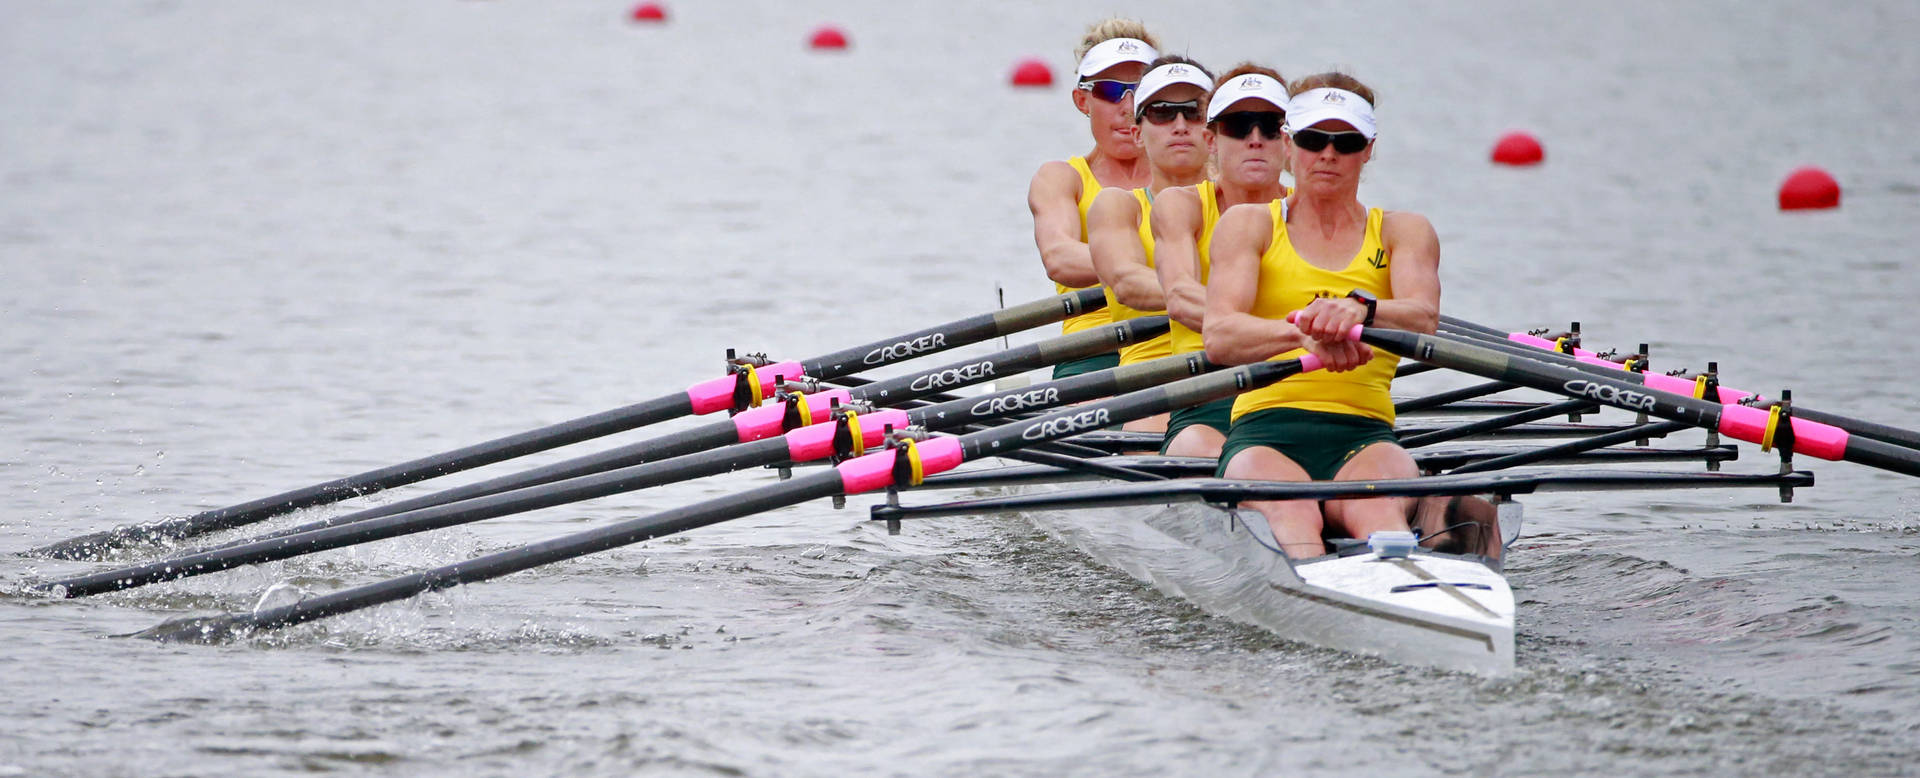 Women's Championship Rowing Team In Action